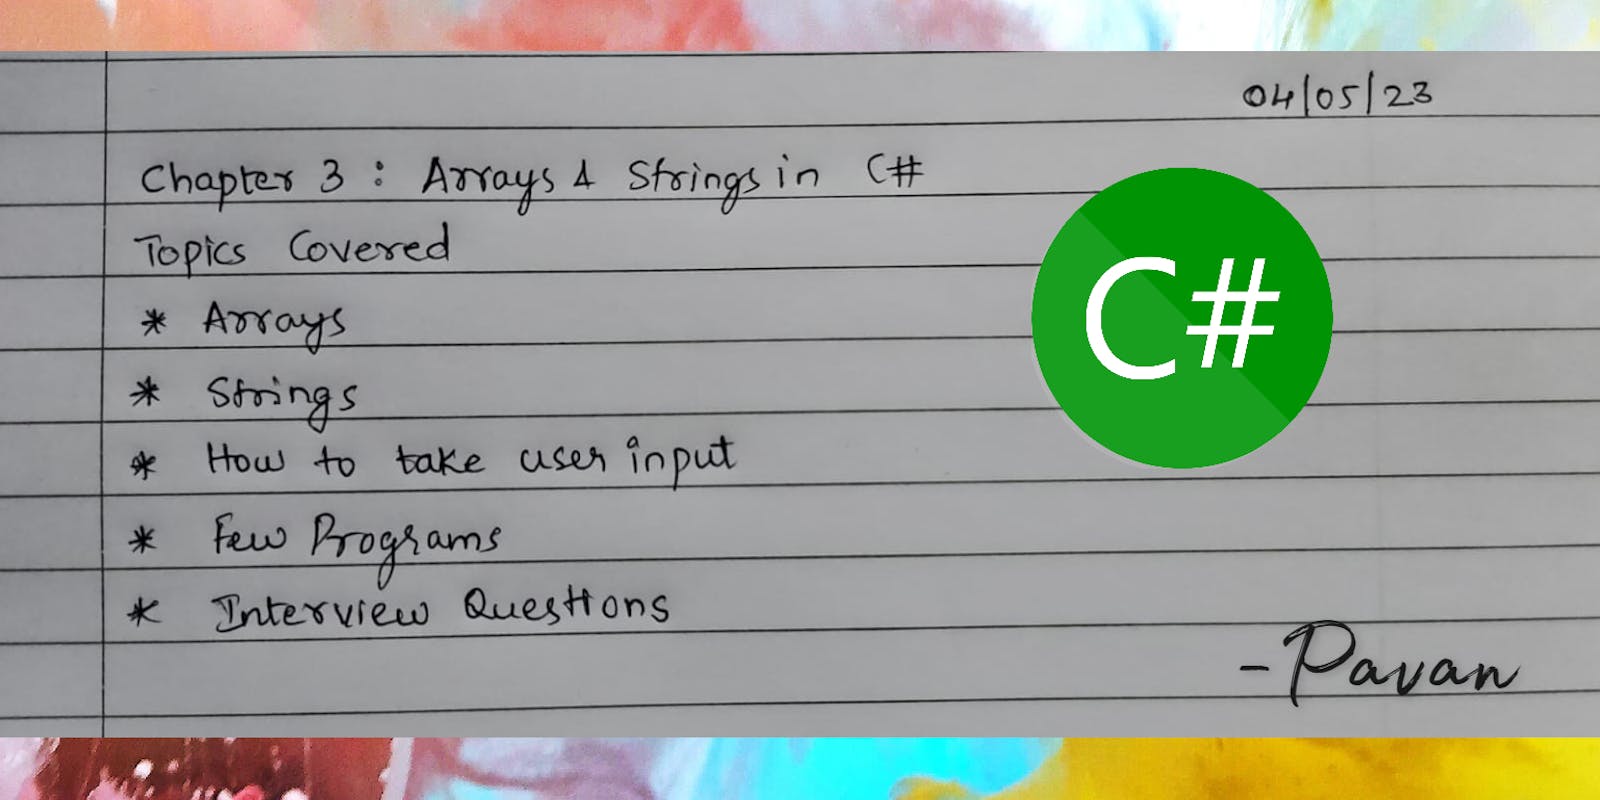 Chapter 3: Arrays and Strings in C#